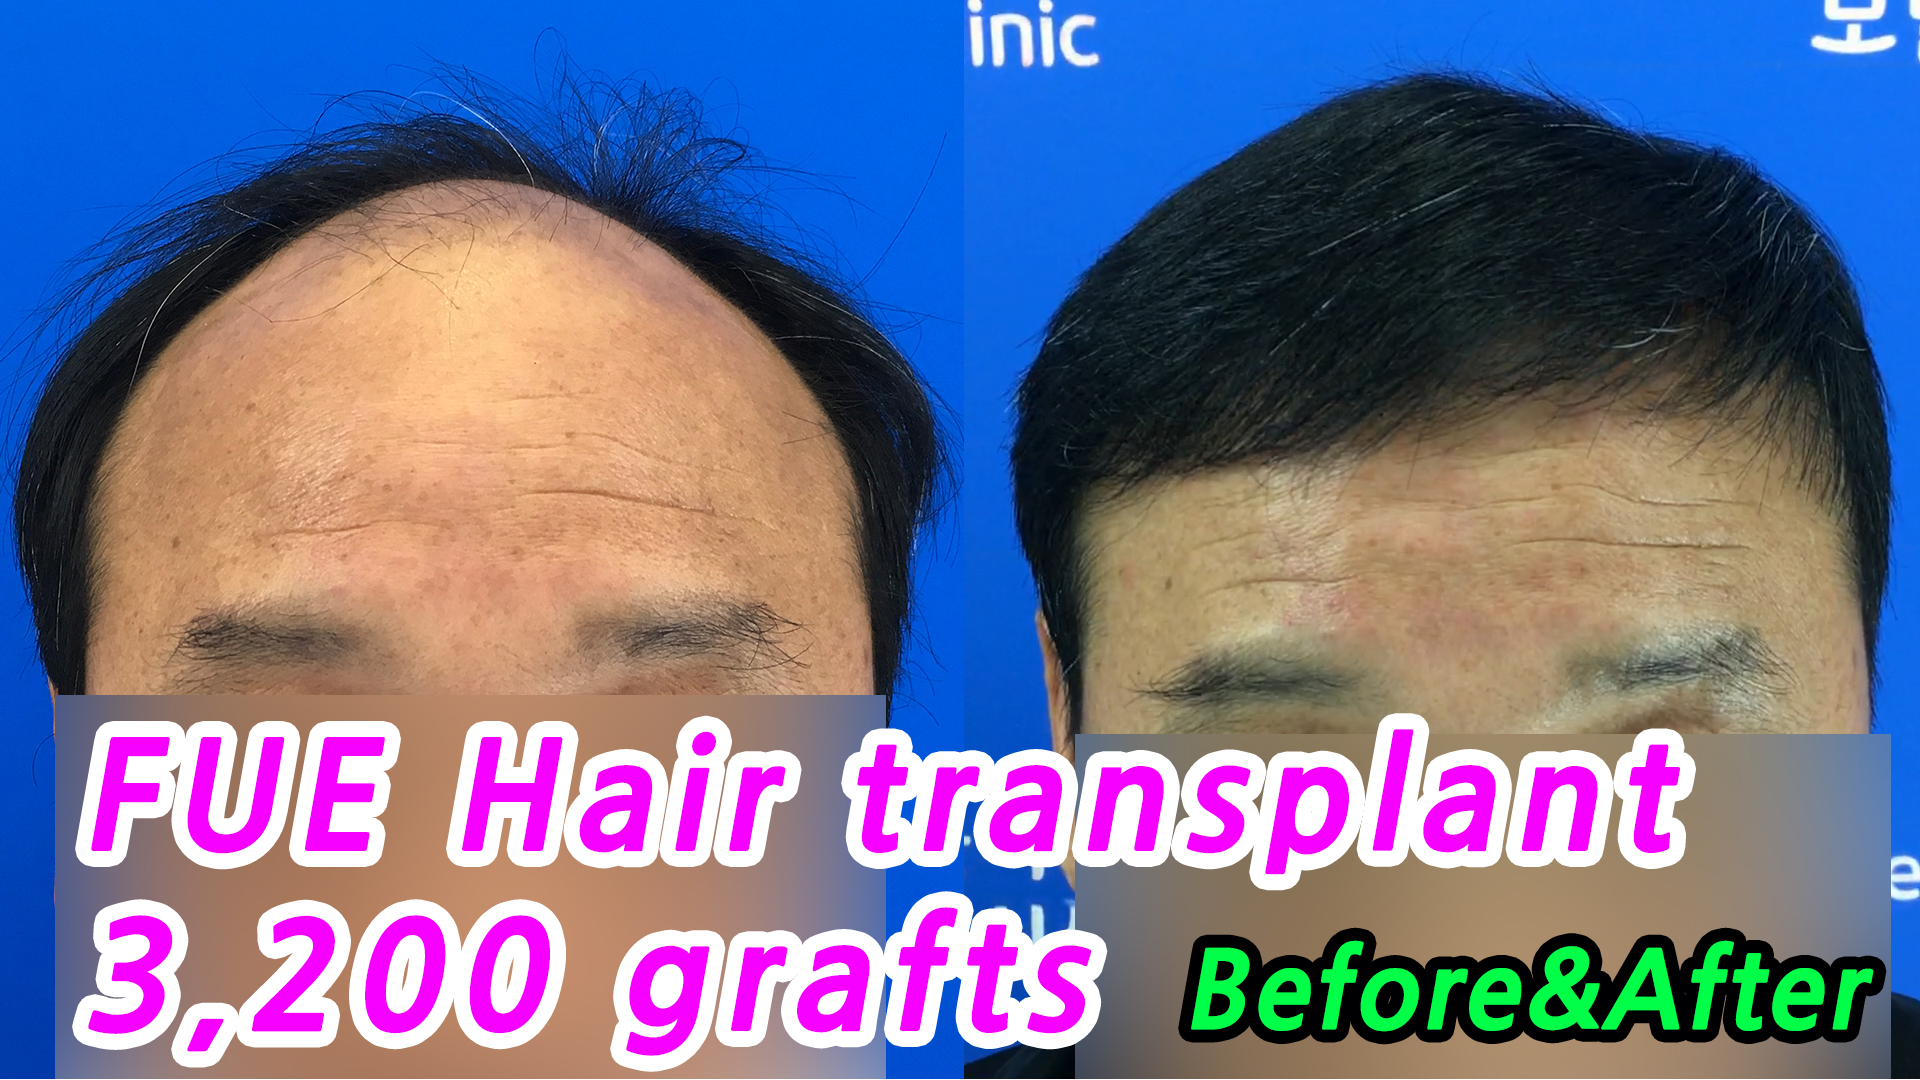 ▷☞Play video☜◁FUE Hair Transplant in Korea (3,200 Grafts)_Before&After